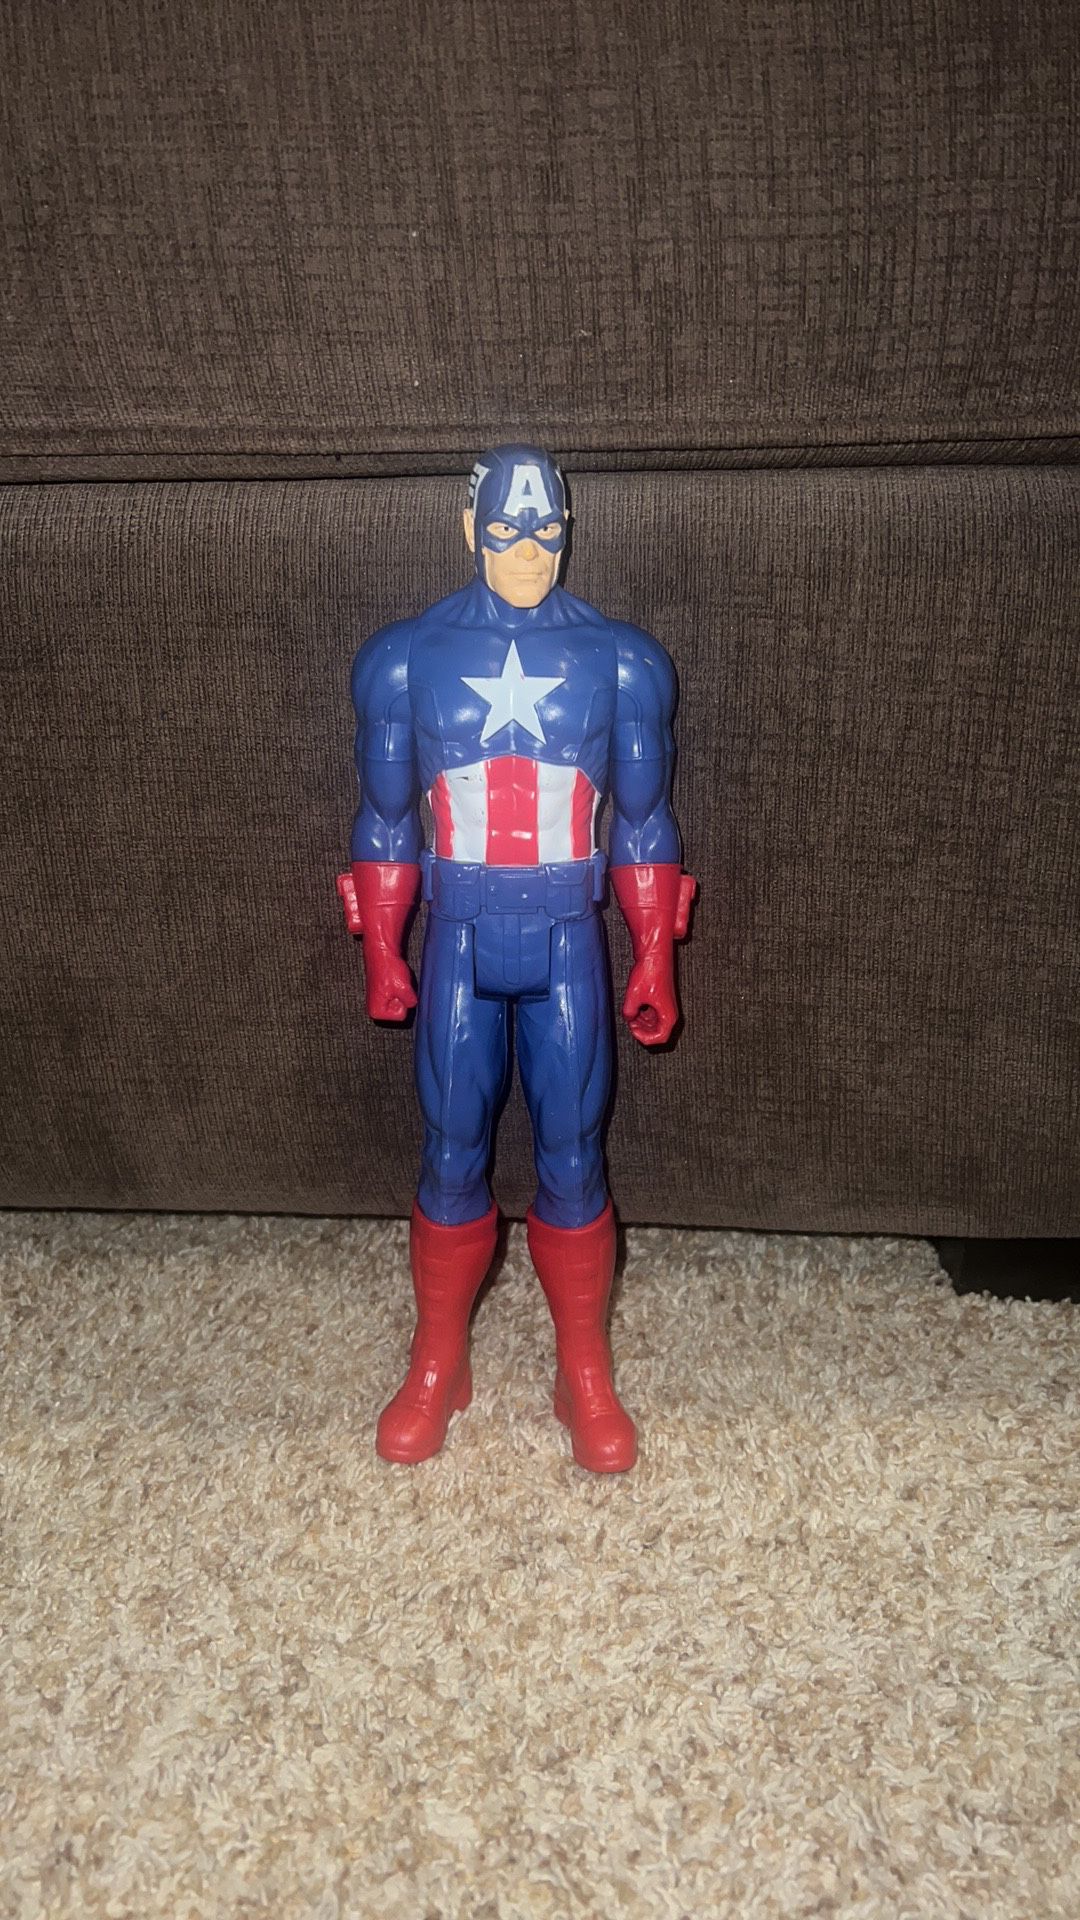 Hasbro Marvel Legends CAPTAIN AMERICA 12-inch Action Figure. Light scratches see pics 